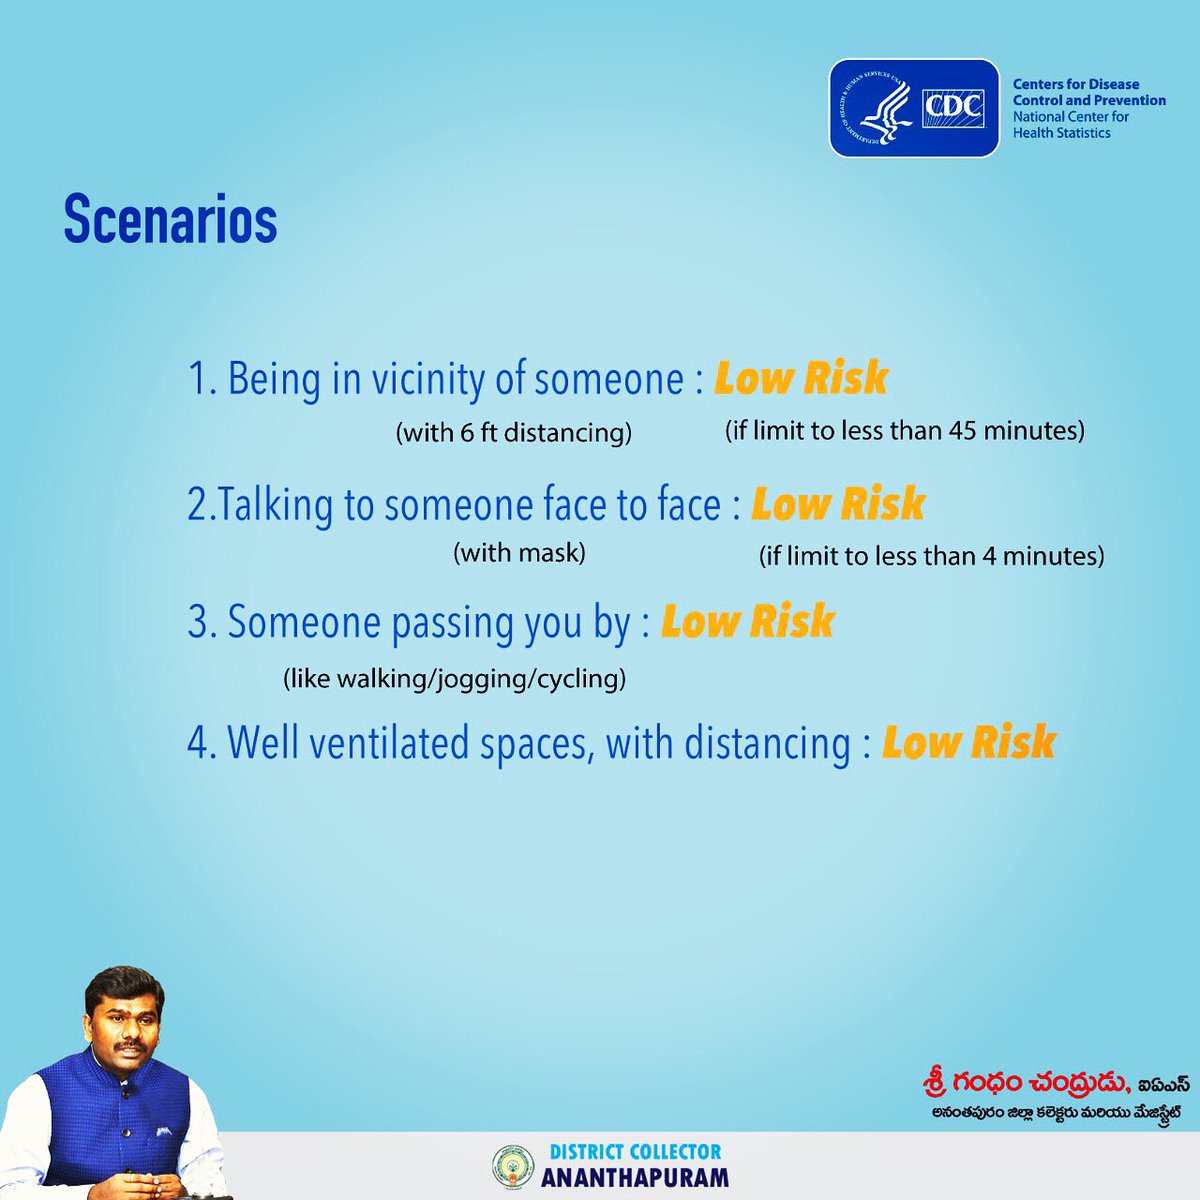 CDC (Centers for Disease Control and Prevention), a Department of Health and Human Services,USA forecasted a list of scenarios where we need to be careful. 

@CDCgov @DCAnanthapuram @anantapurgoap 

#COVID19 #apfightscorona #CDC #StayHomeStaySafe #resilience #fightagainstcorona